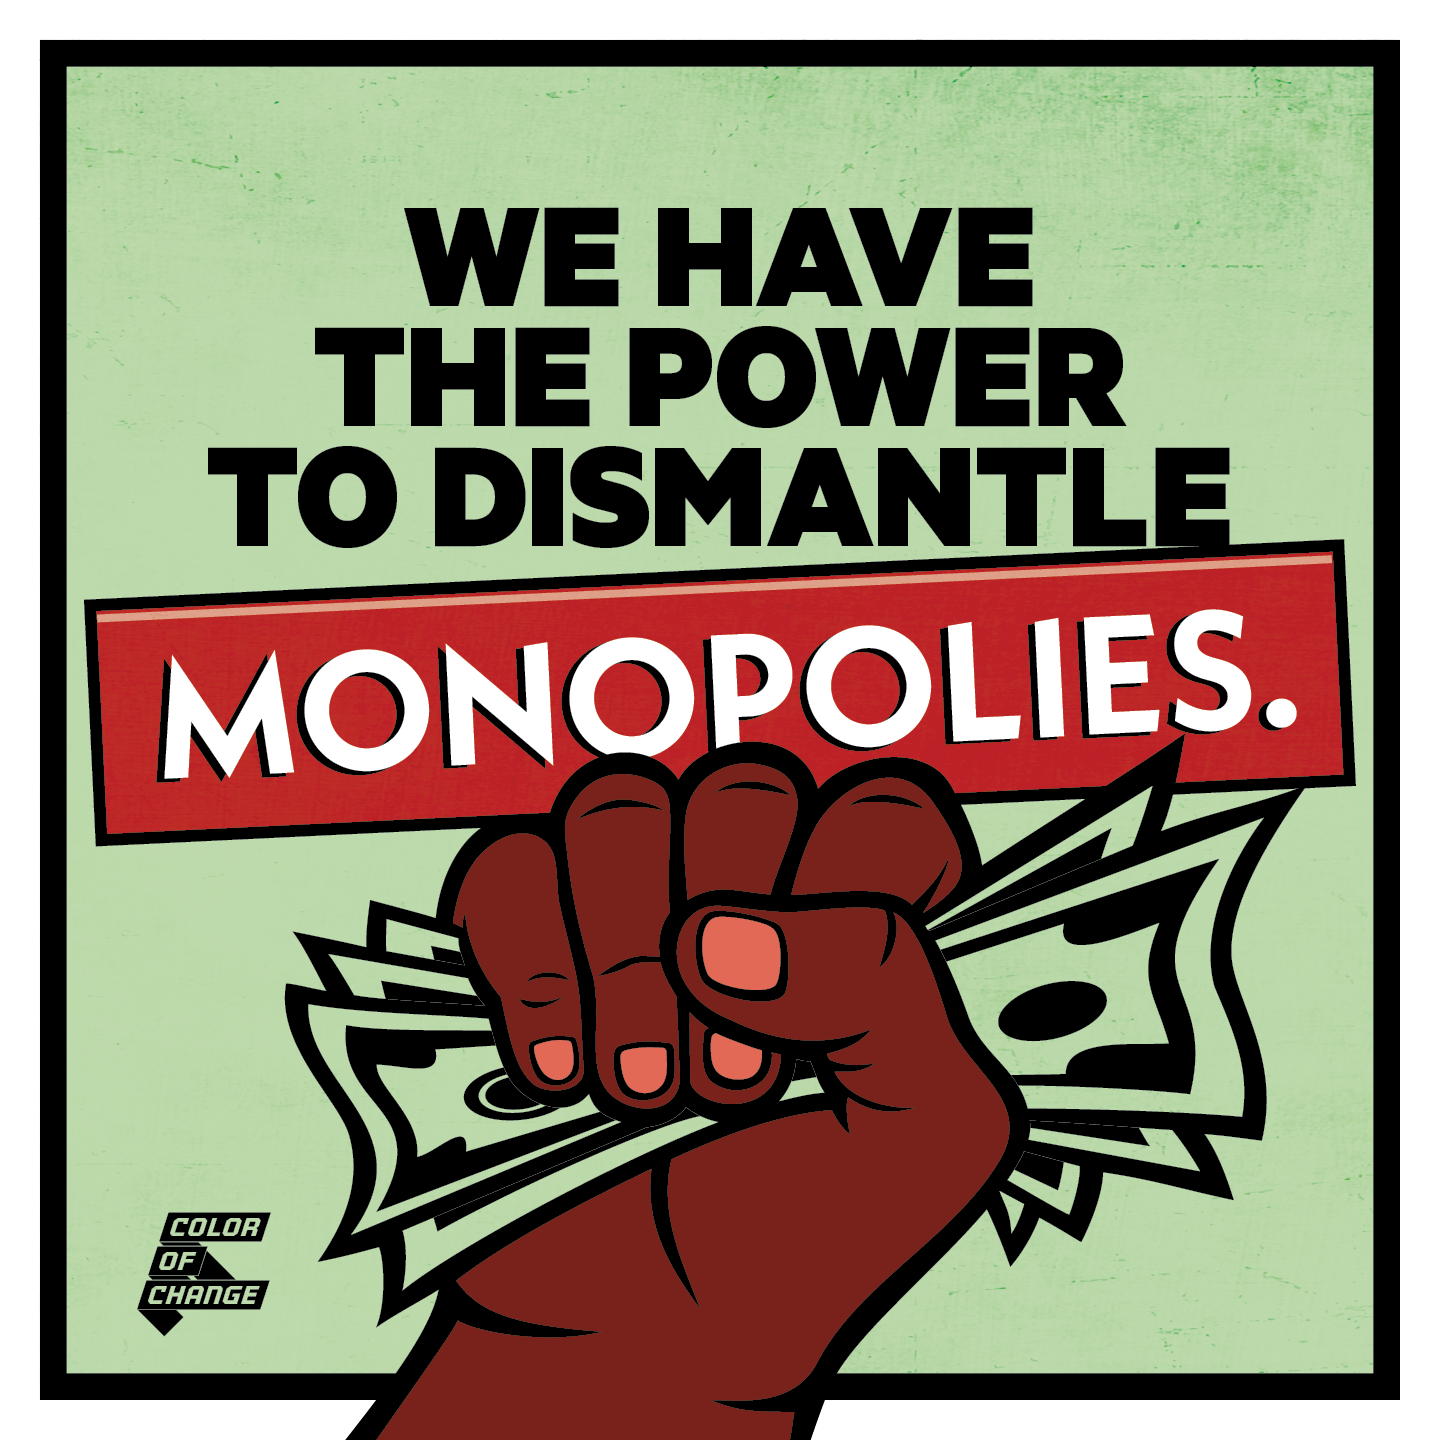 The text reads, "We have the power to dismantle monopolies." The graphic is a raised fist that is clutching dollar bills.